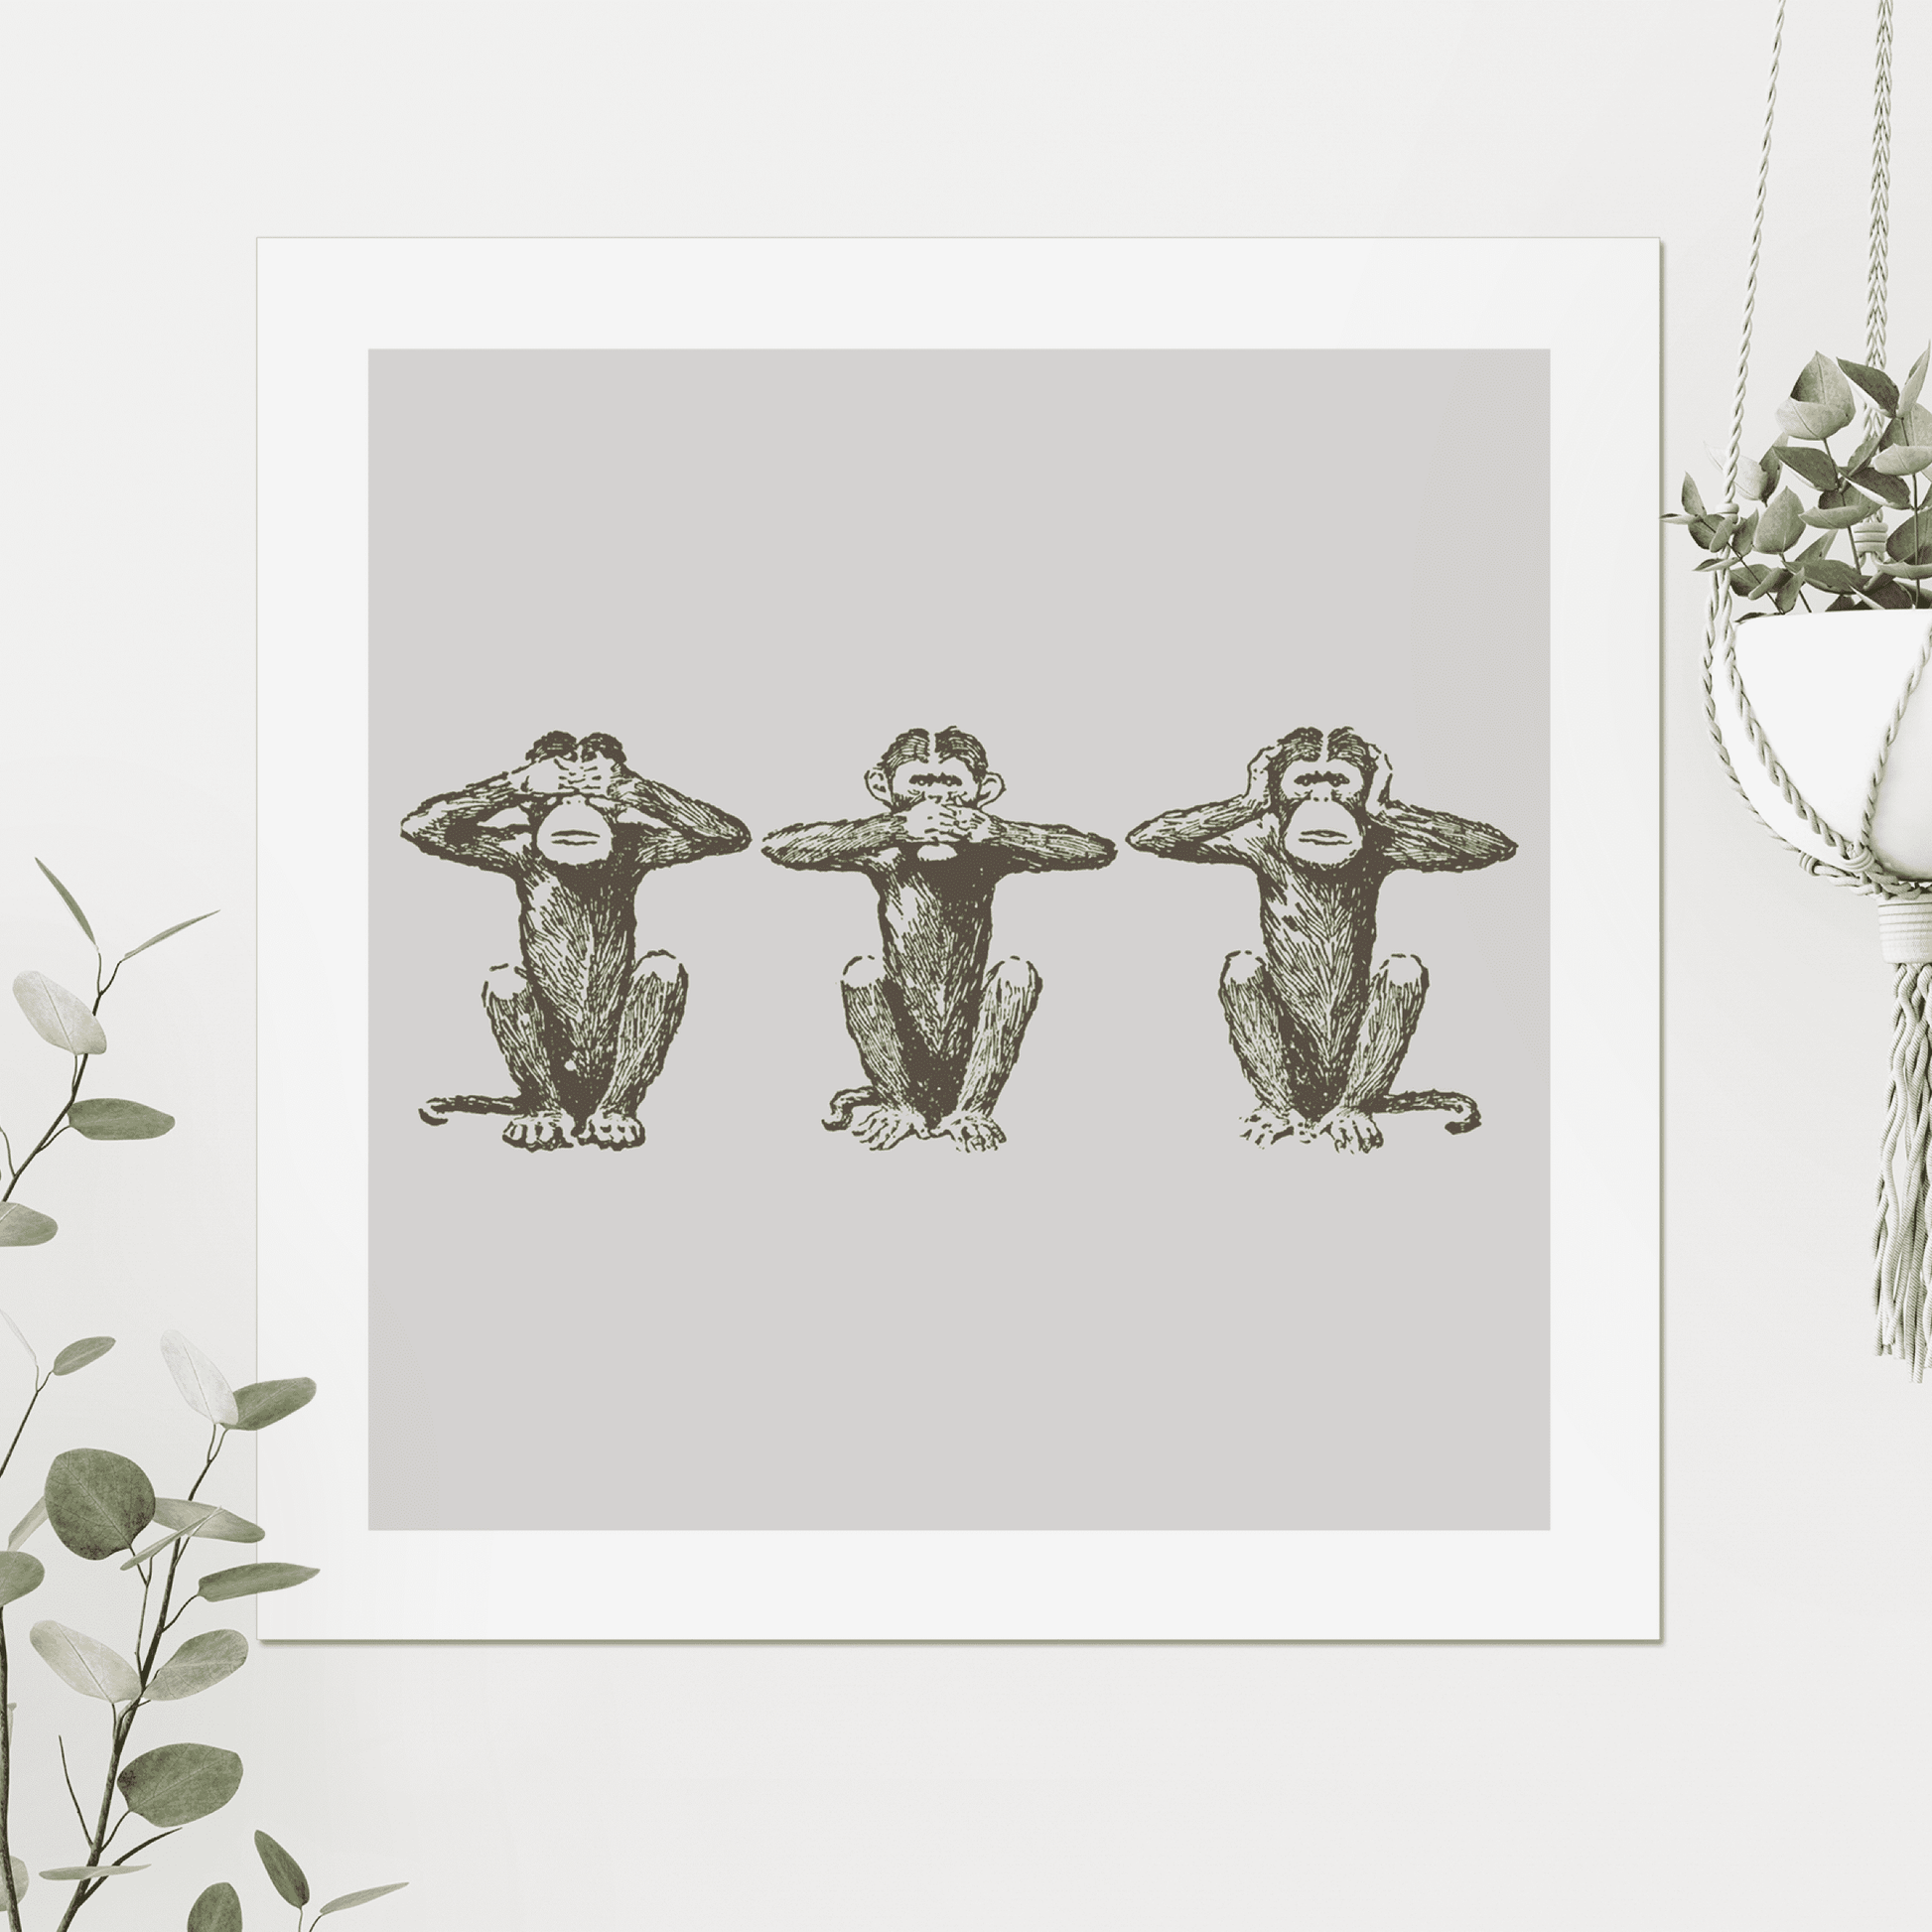 This cheeky trio continue to trend in home decor, and we continue to love them. A quirky print sure to make a fun statement in your home, and will display perfectly as a stand alone piece or as part of your gallery wall. 